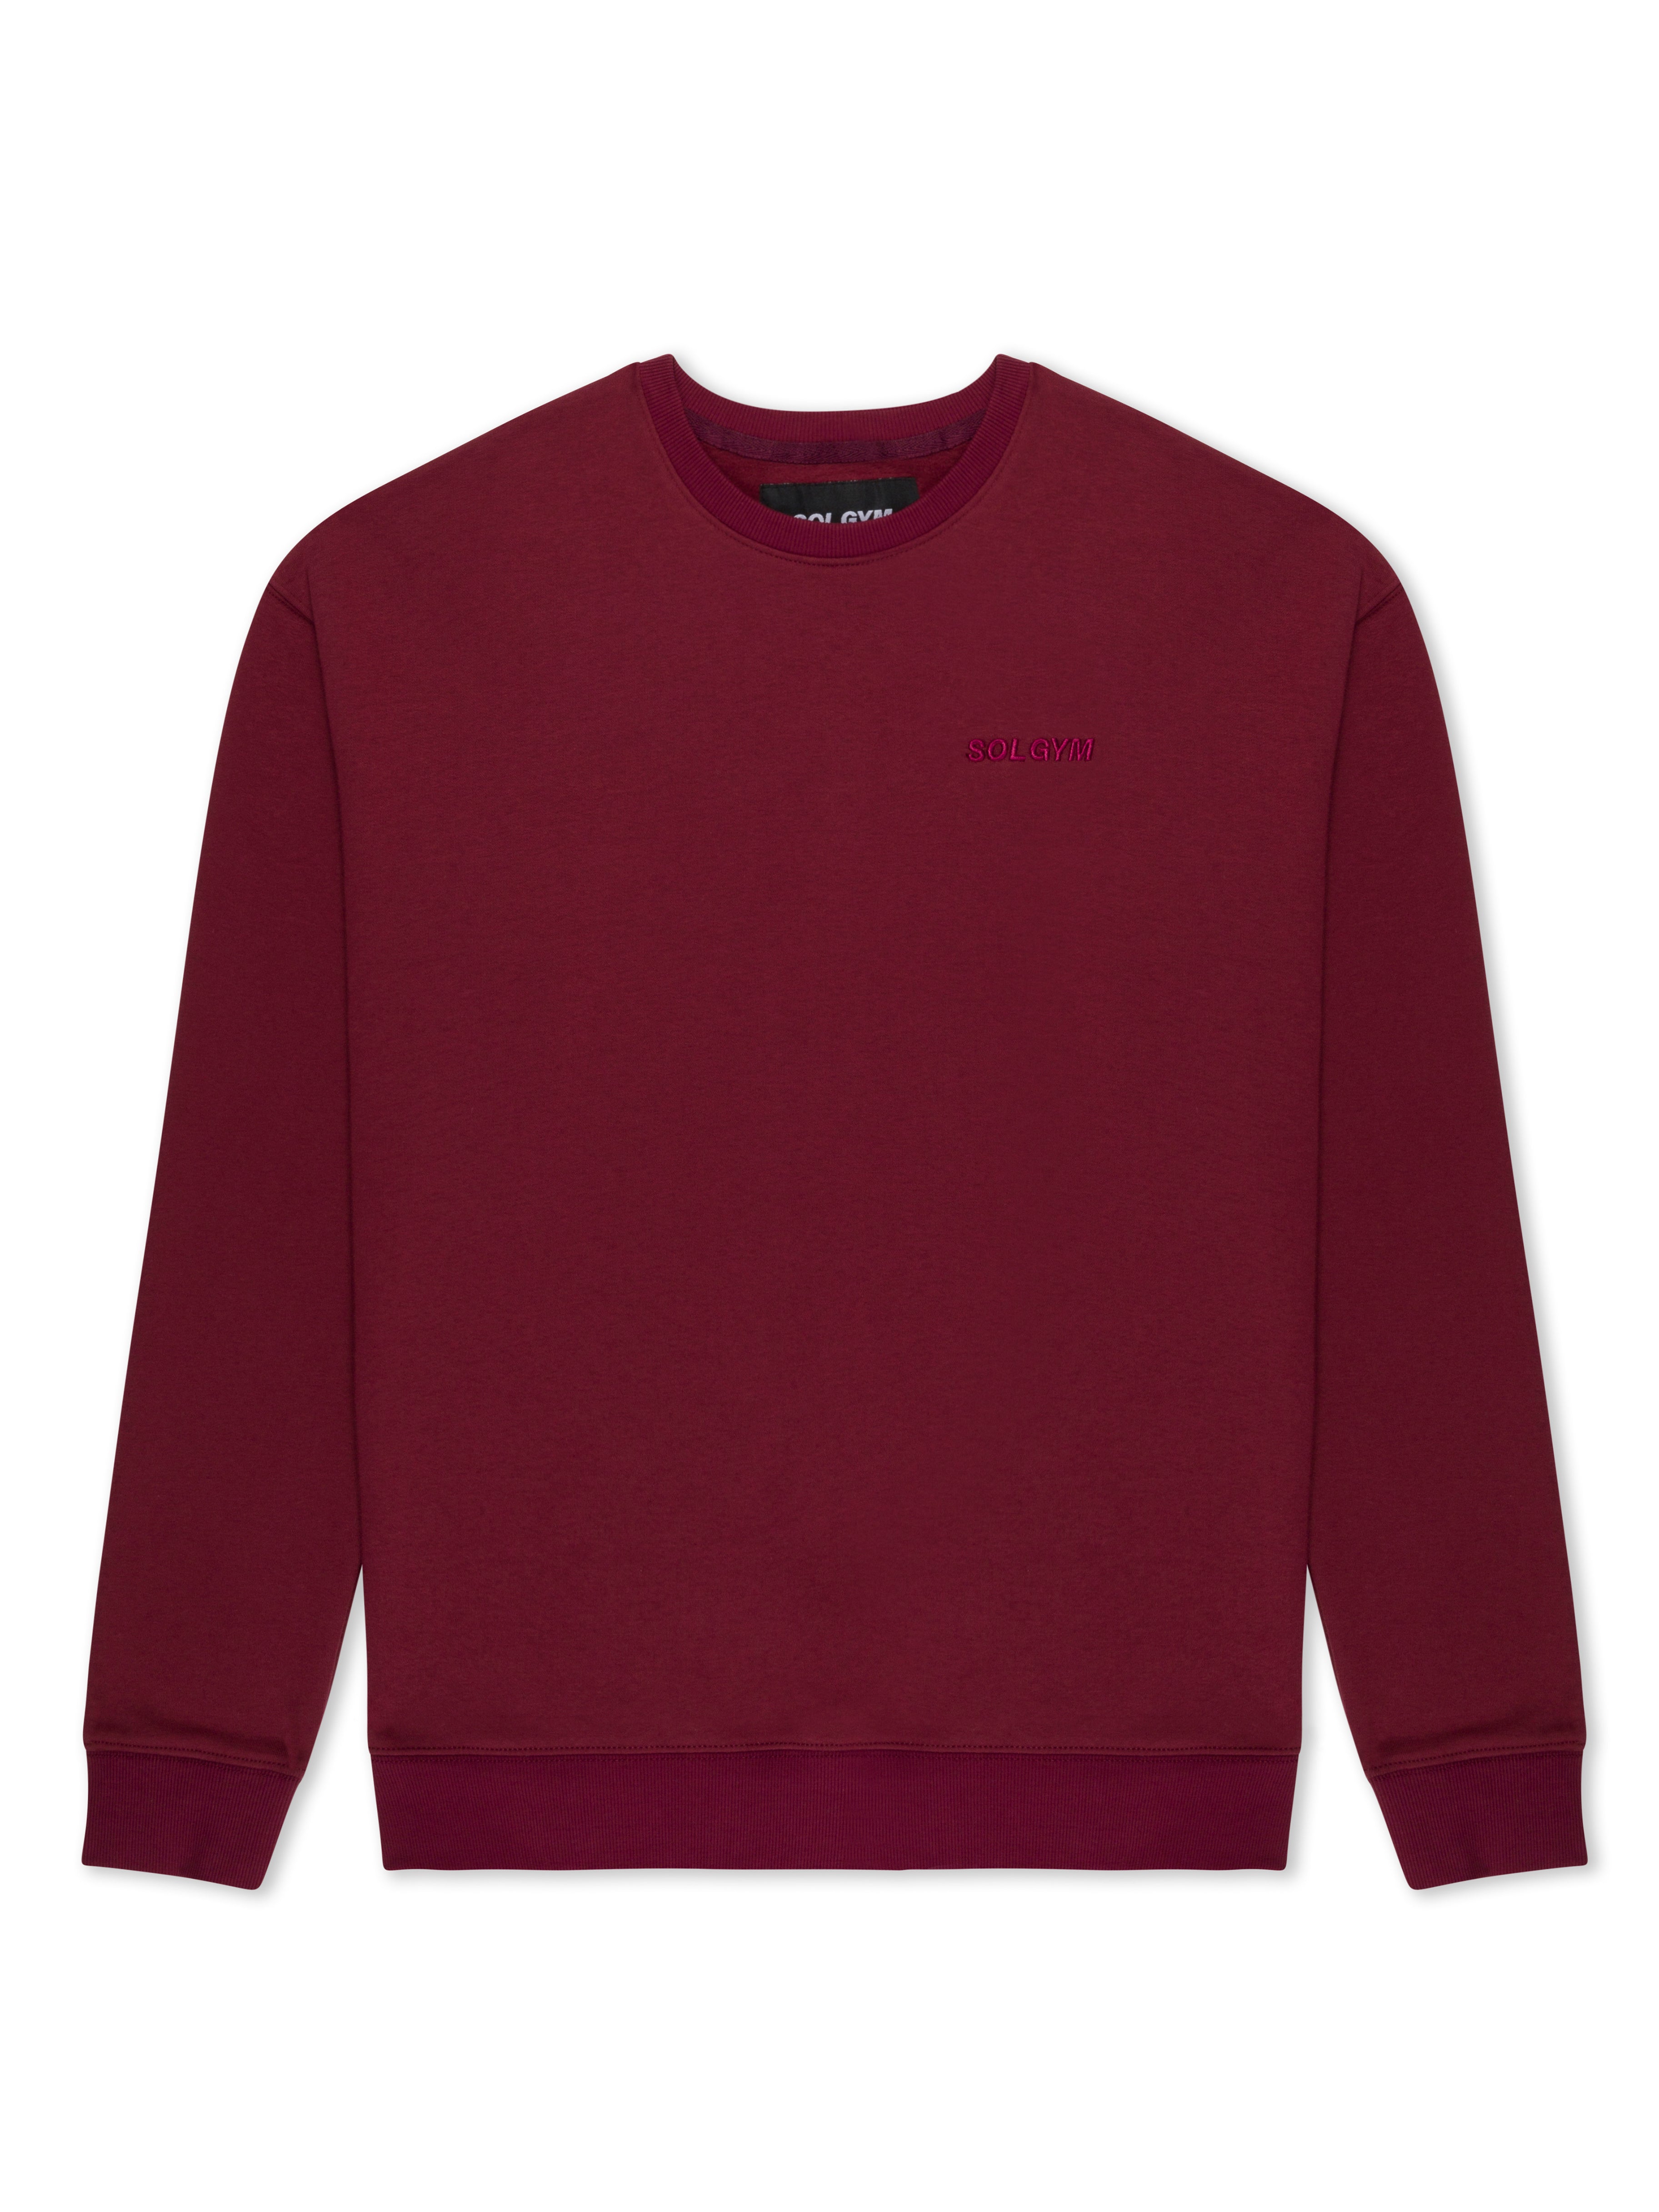 Sol Gym Cotton Long Sleeve Sweater, Maroon